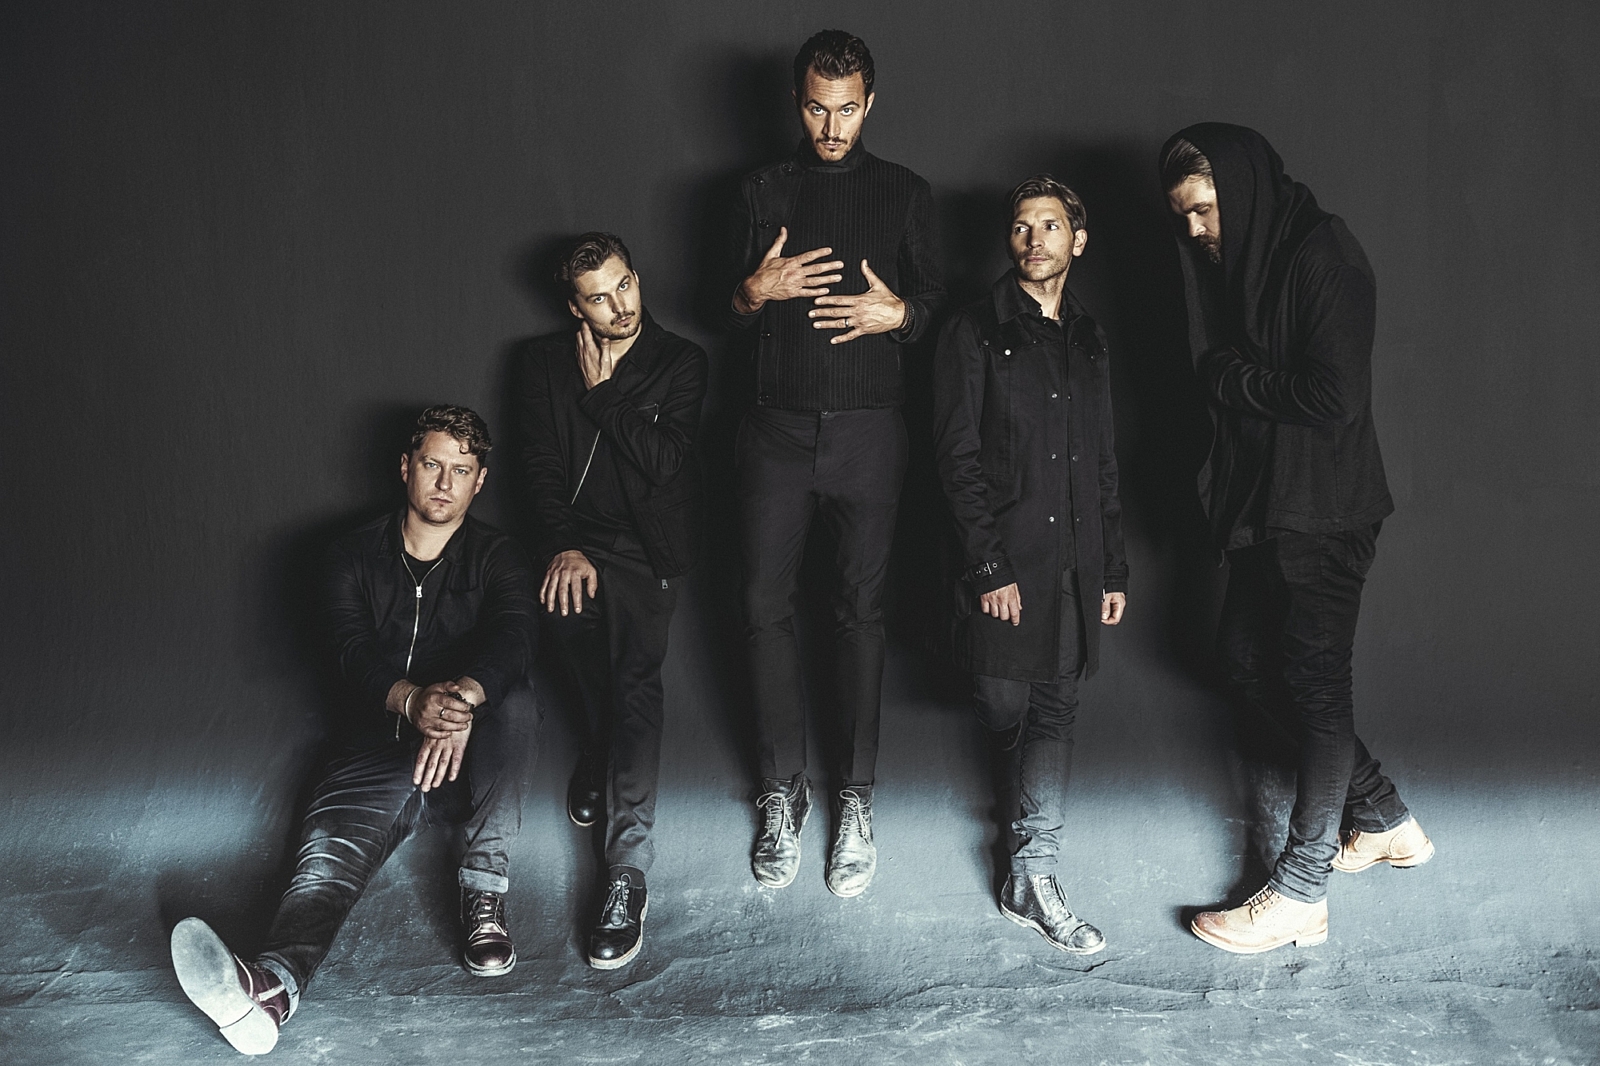 Editors unveil new single 'Frankenstein', a "cartoon song for the freaks"